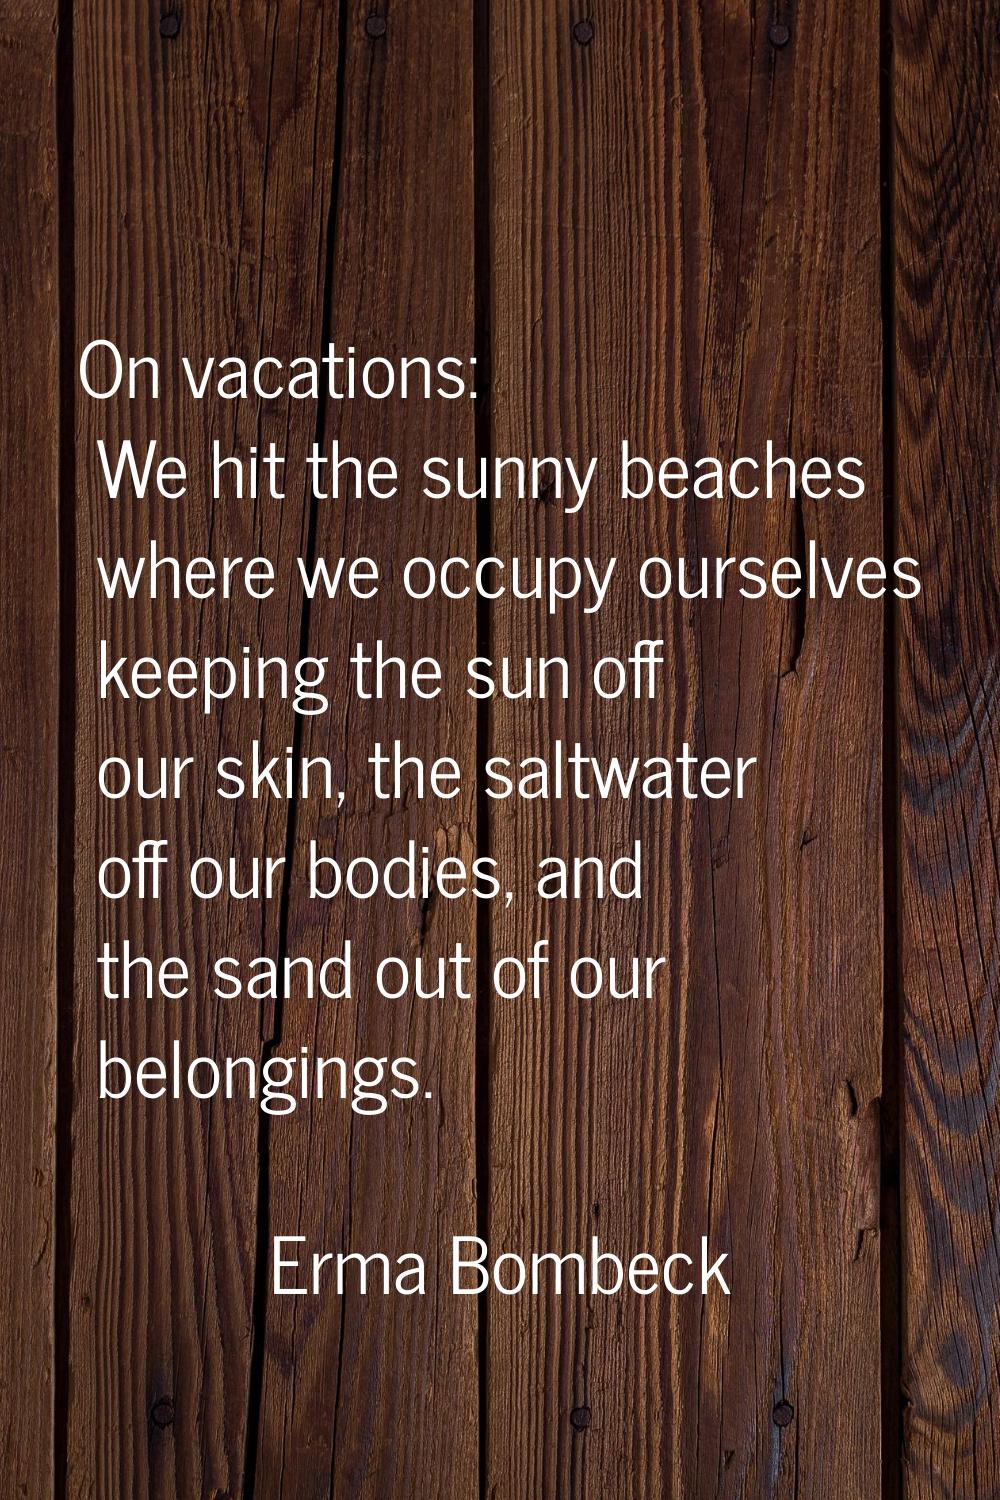 On vacations: We hit the sunny beaches where we occupy ourselves keeping the sun off our skin, the 